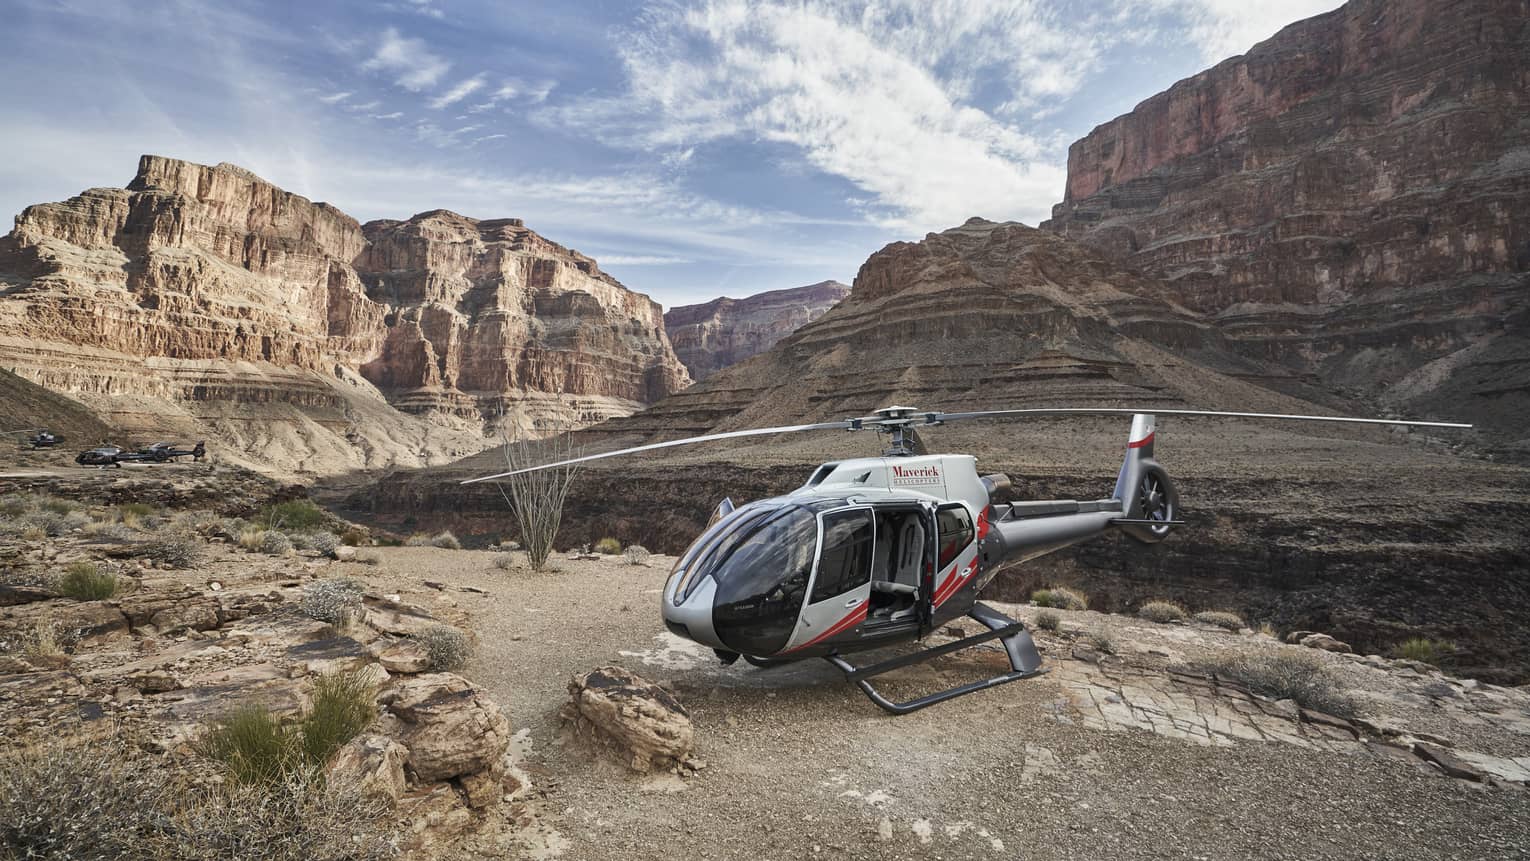 Helicopter sits on rock ledge at Grand Canyon